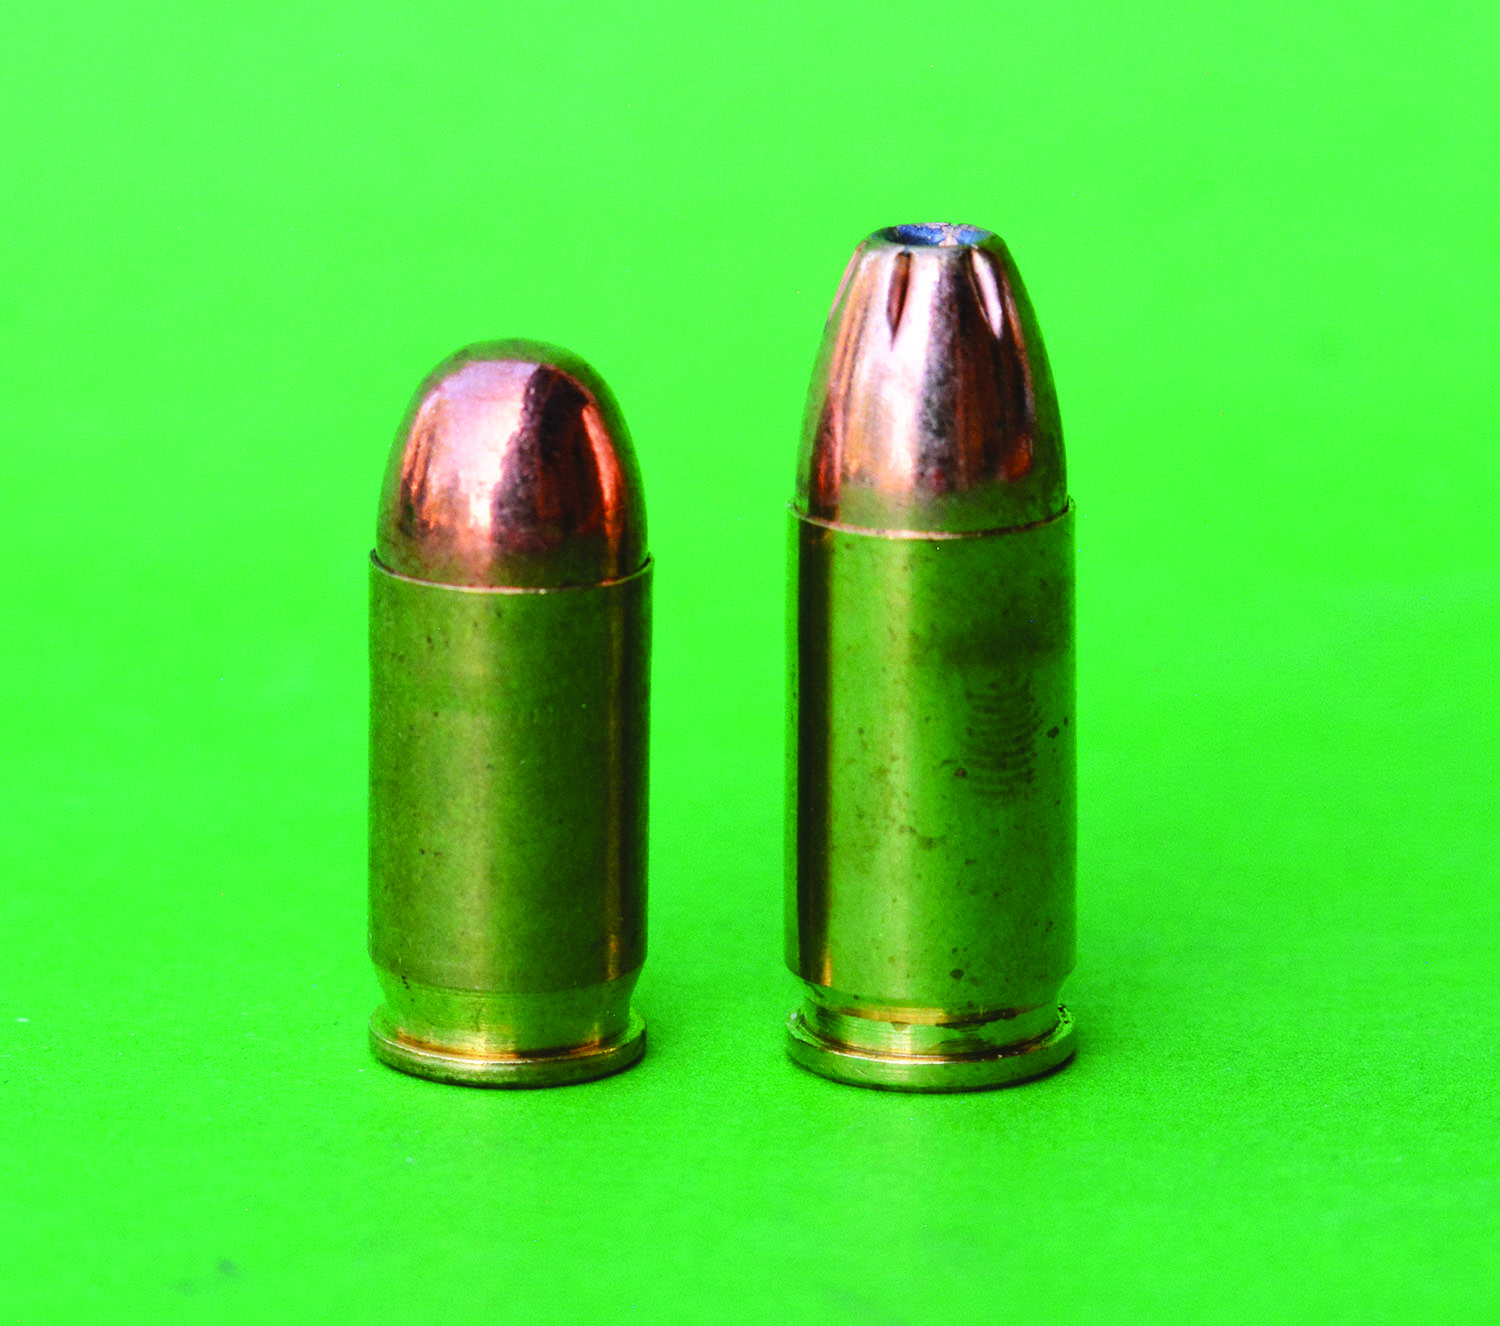 The 380 ACP (left) is notably smaller and shorter than the 9mm Luger (right), which limits suitable bullet weights and powder